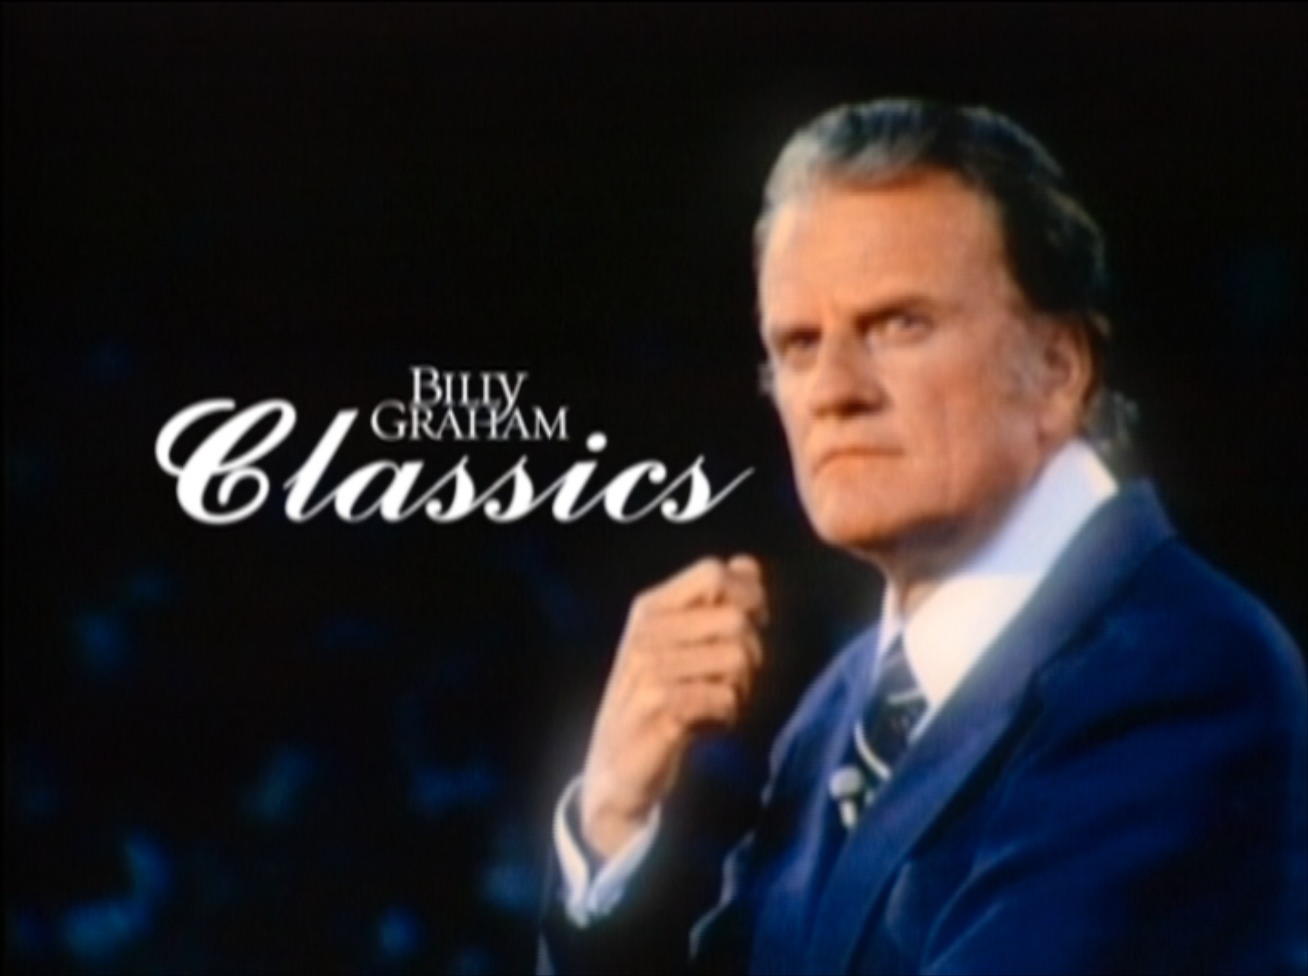 Truth and Freedom: A Classic Billy Graham Message